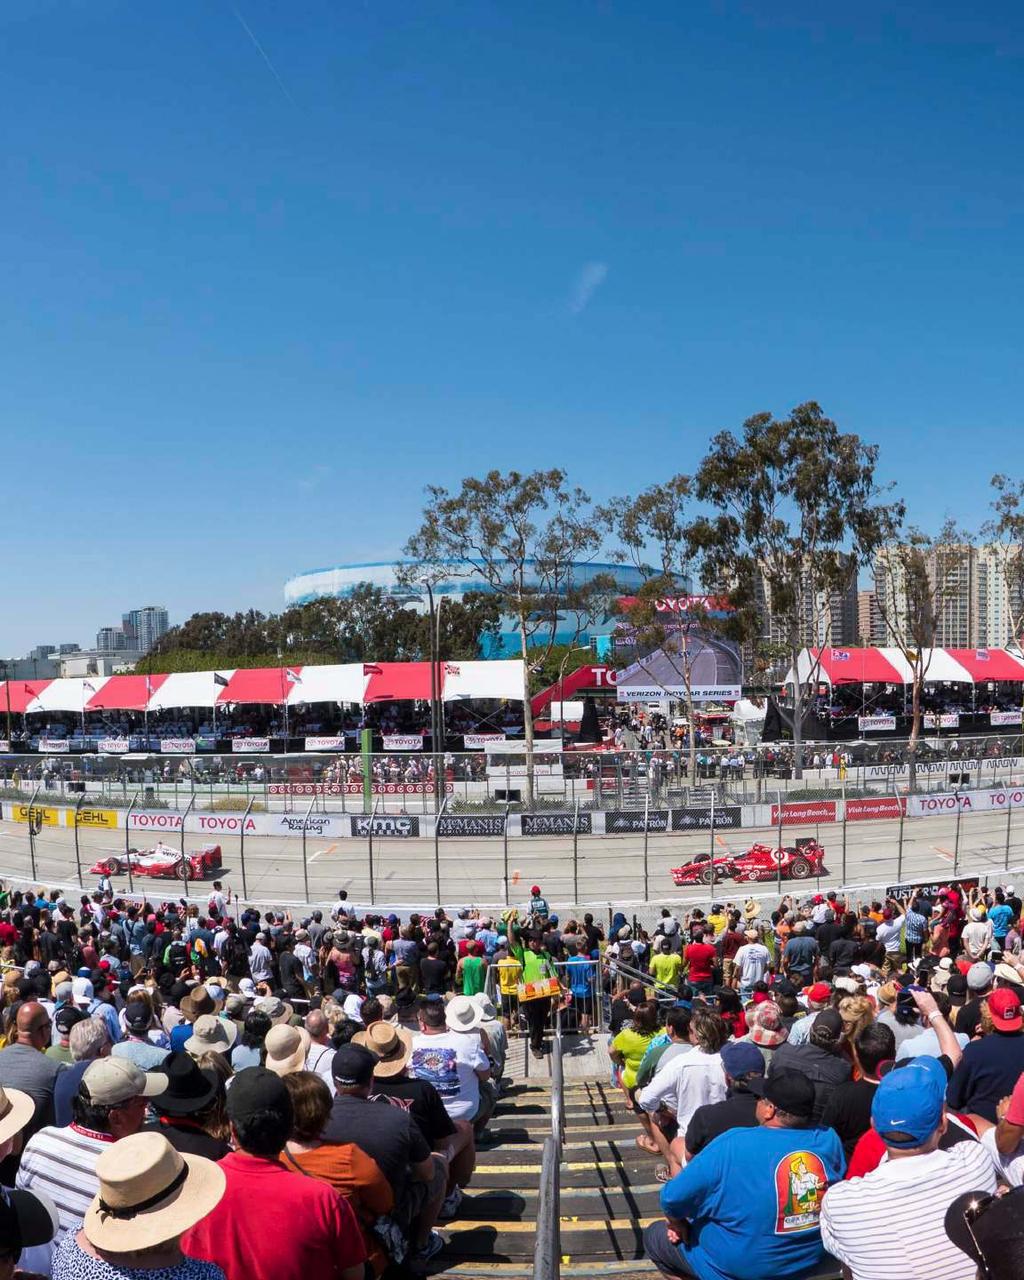 Join us for the 44TH TOYOTA GRAND PRIX OF LONG BEACH,